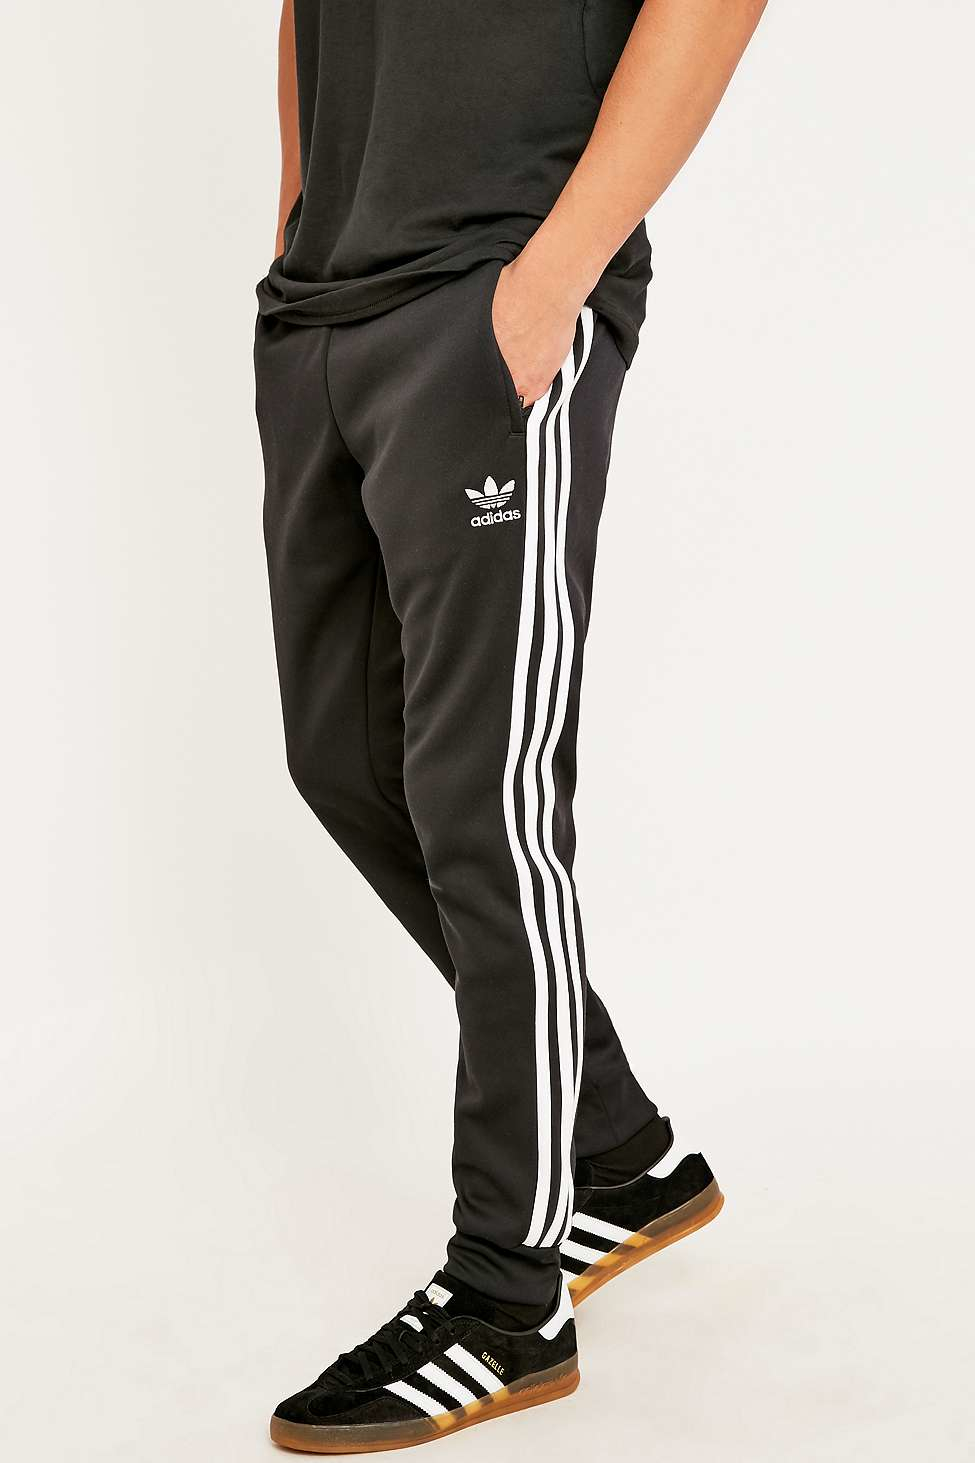 Buy > adidas superstar tracksuits > in stock